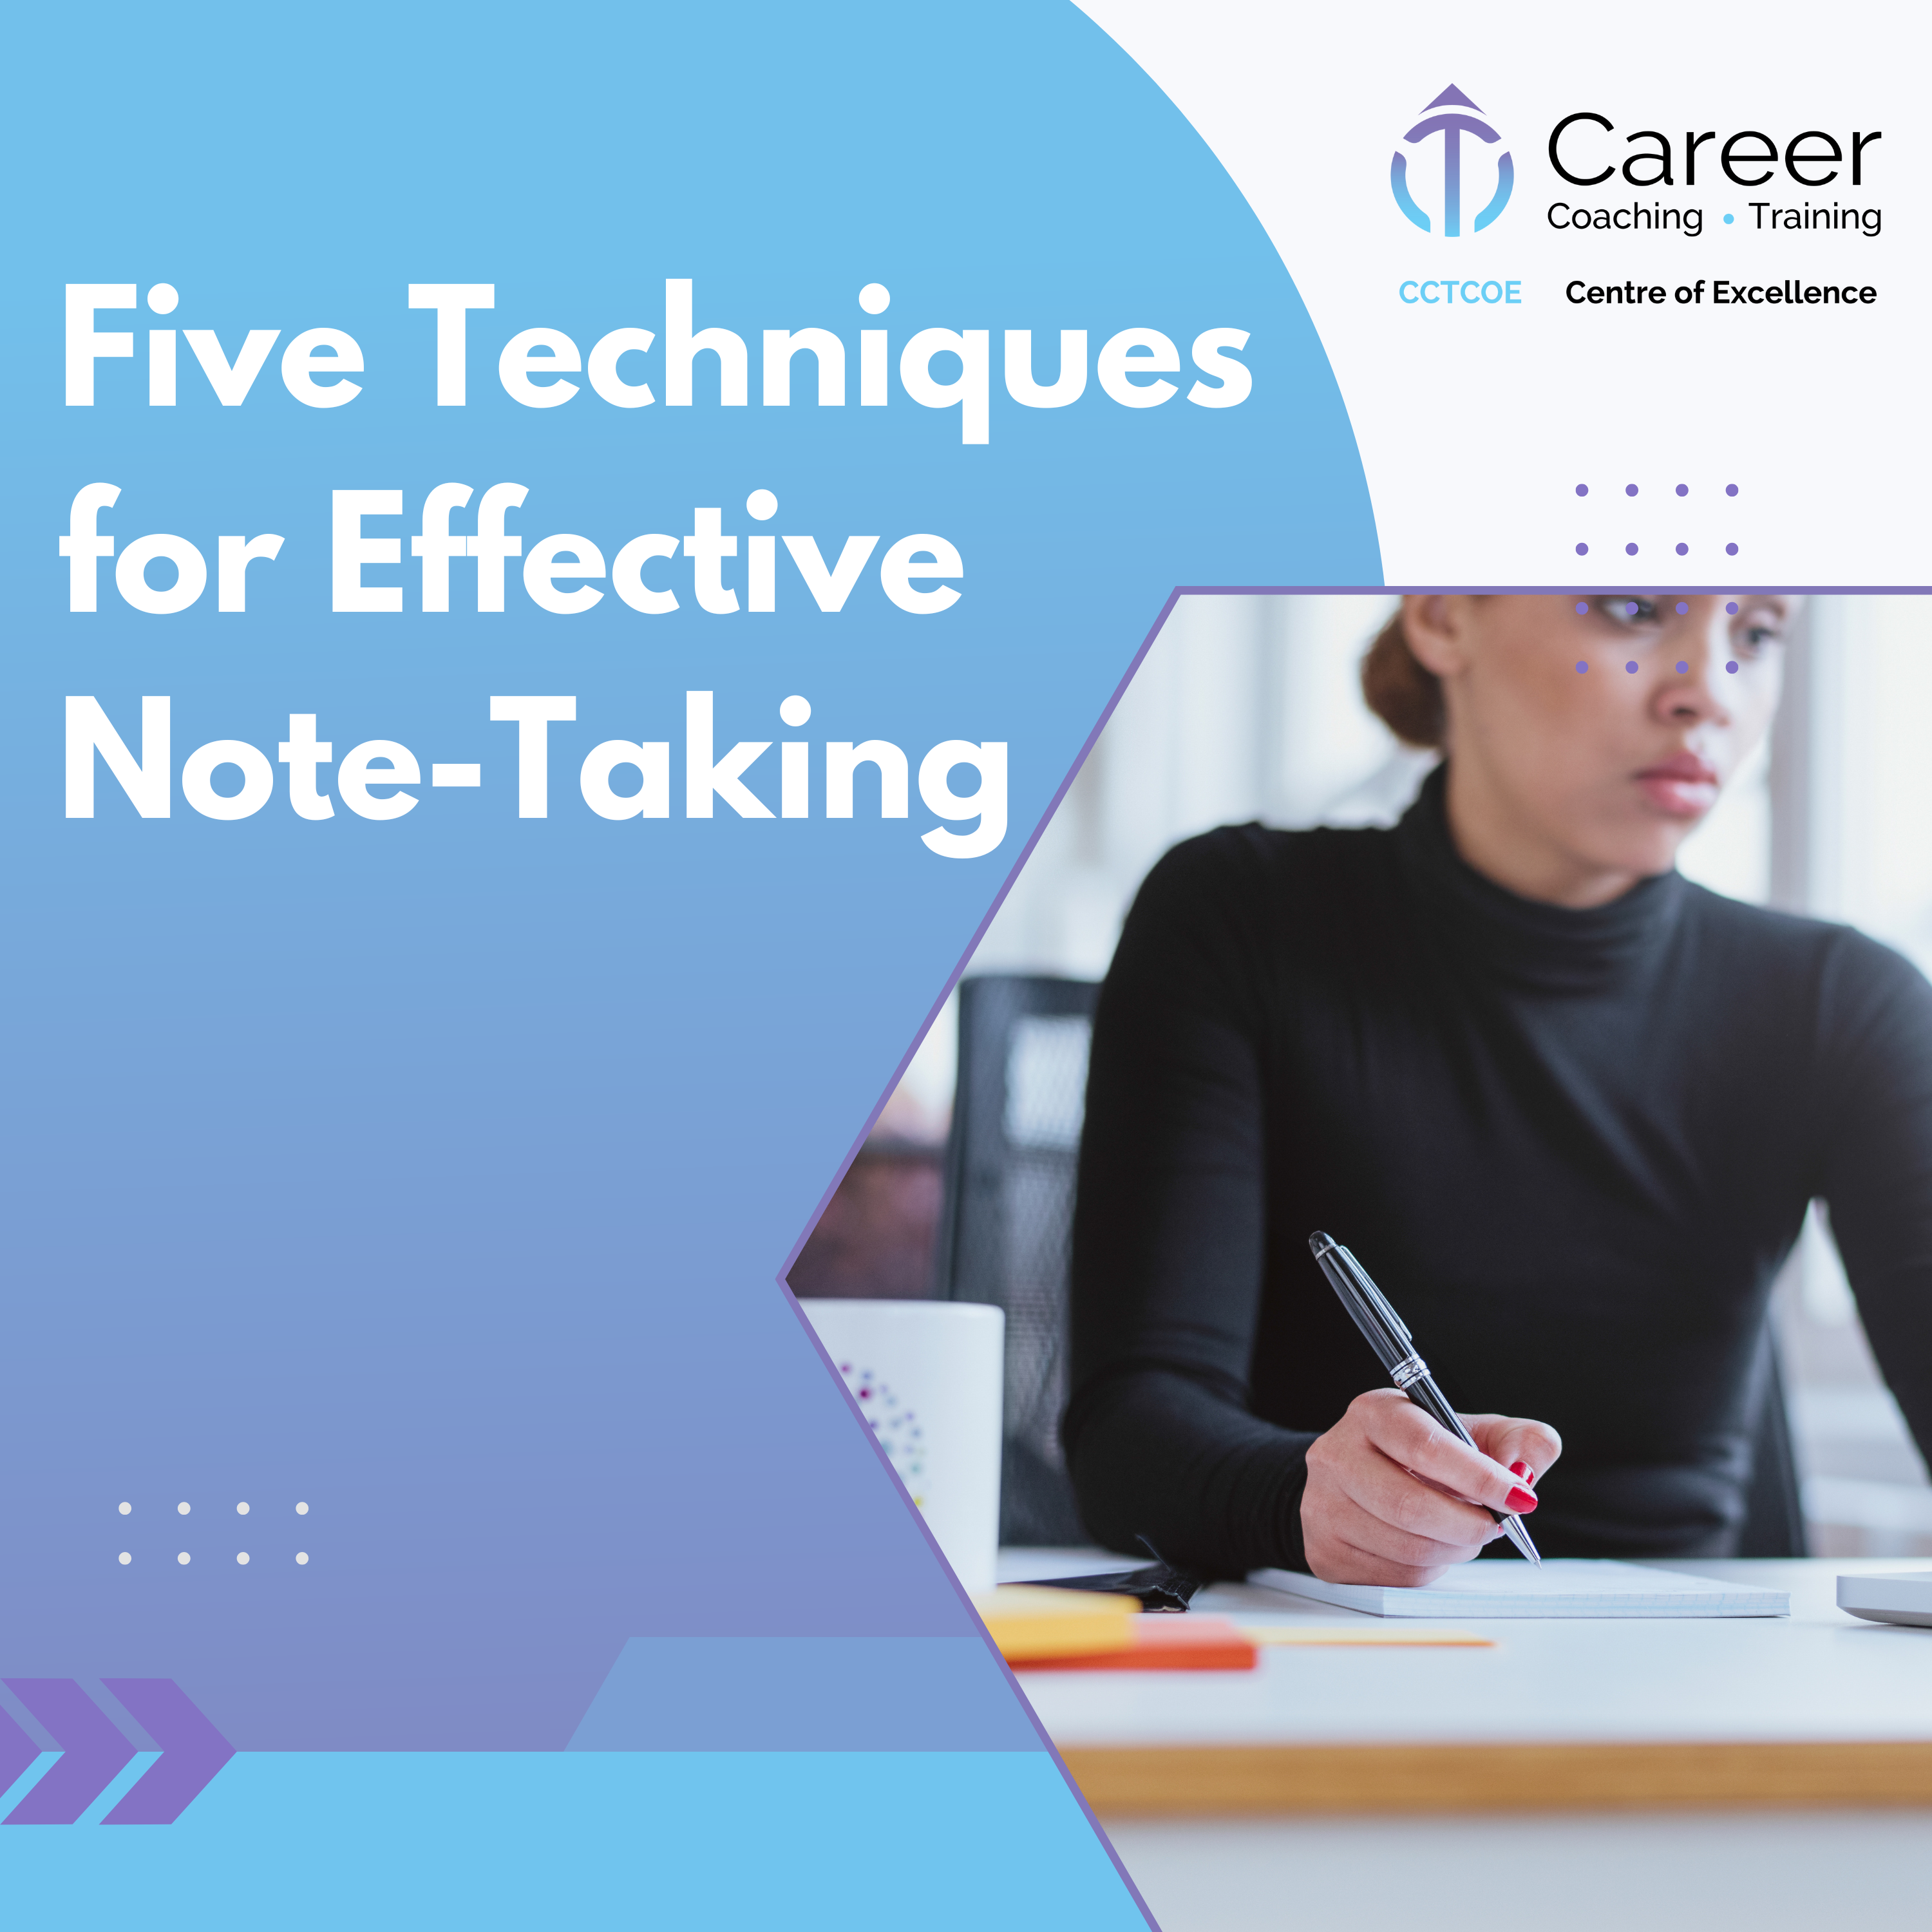 Five Techniques for Effective Note Taking